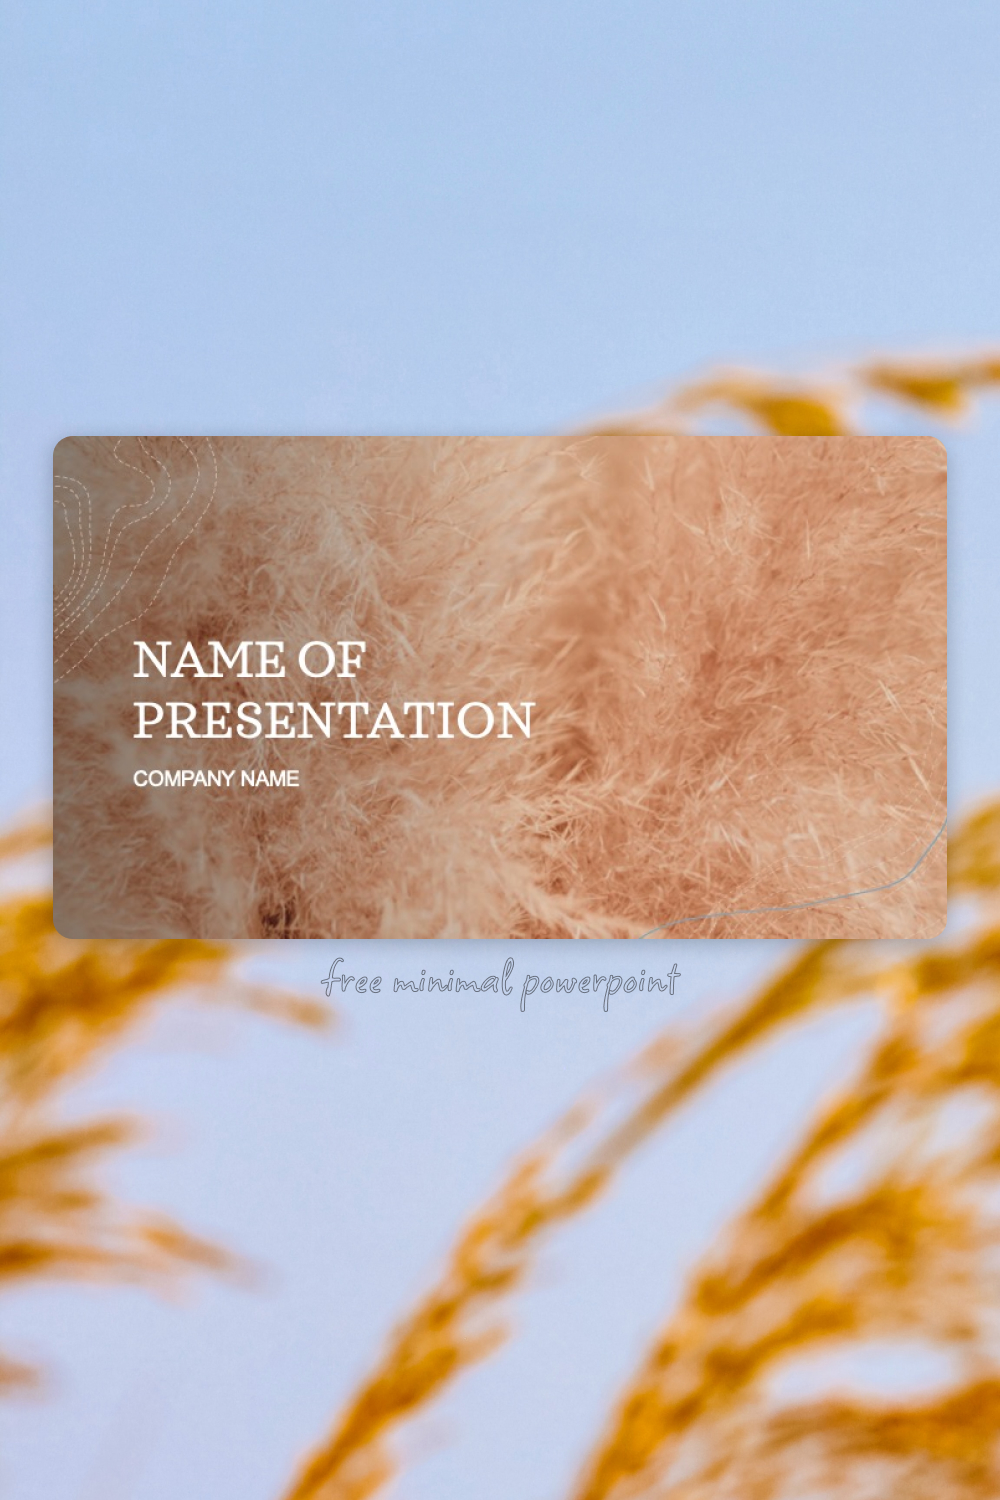 An image with a presentation key.